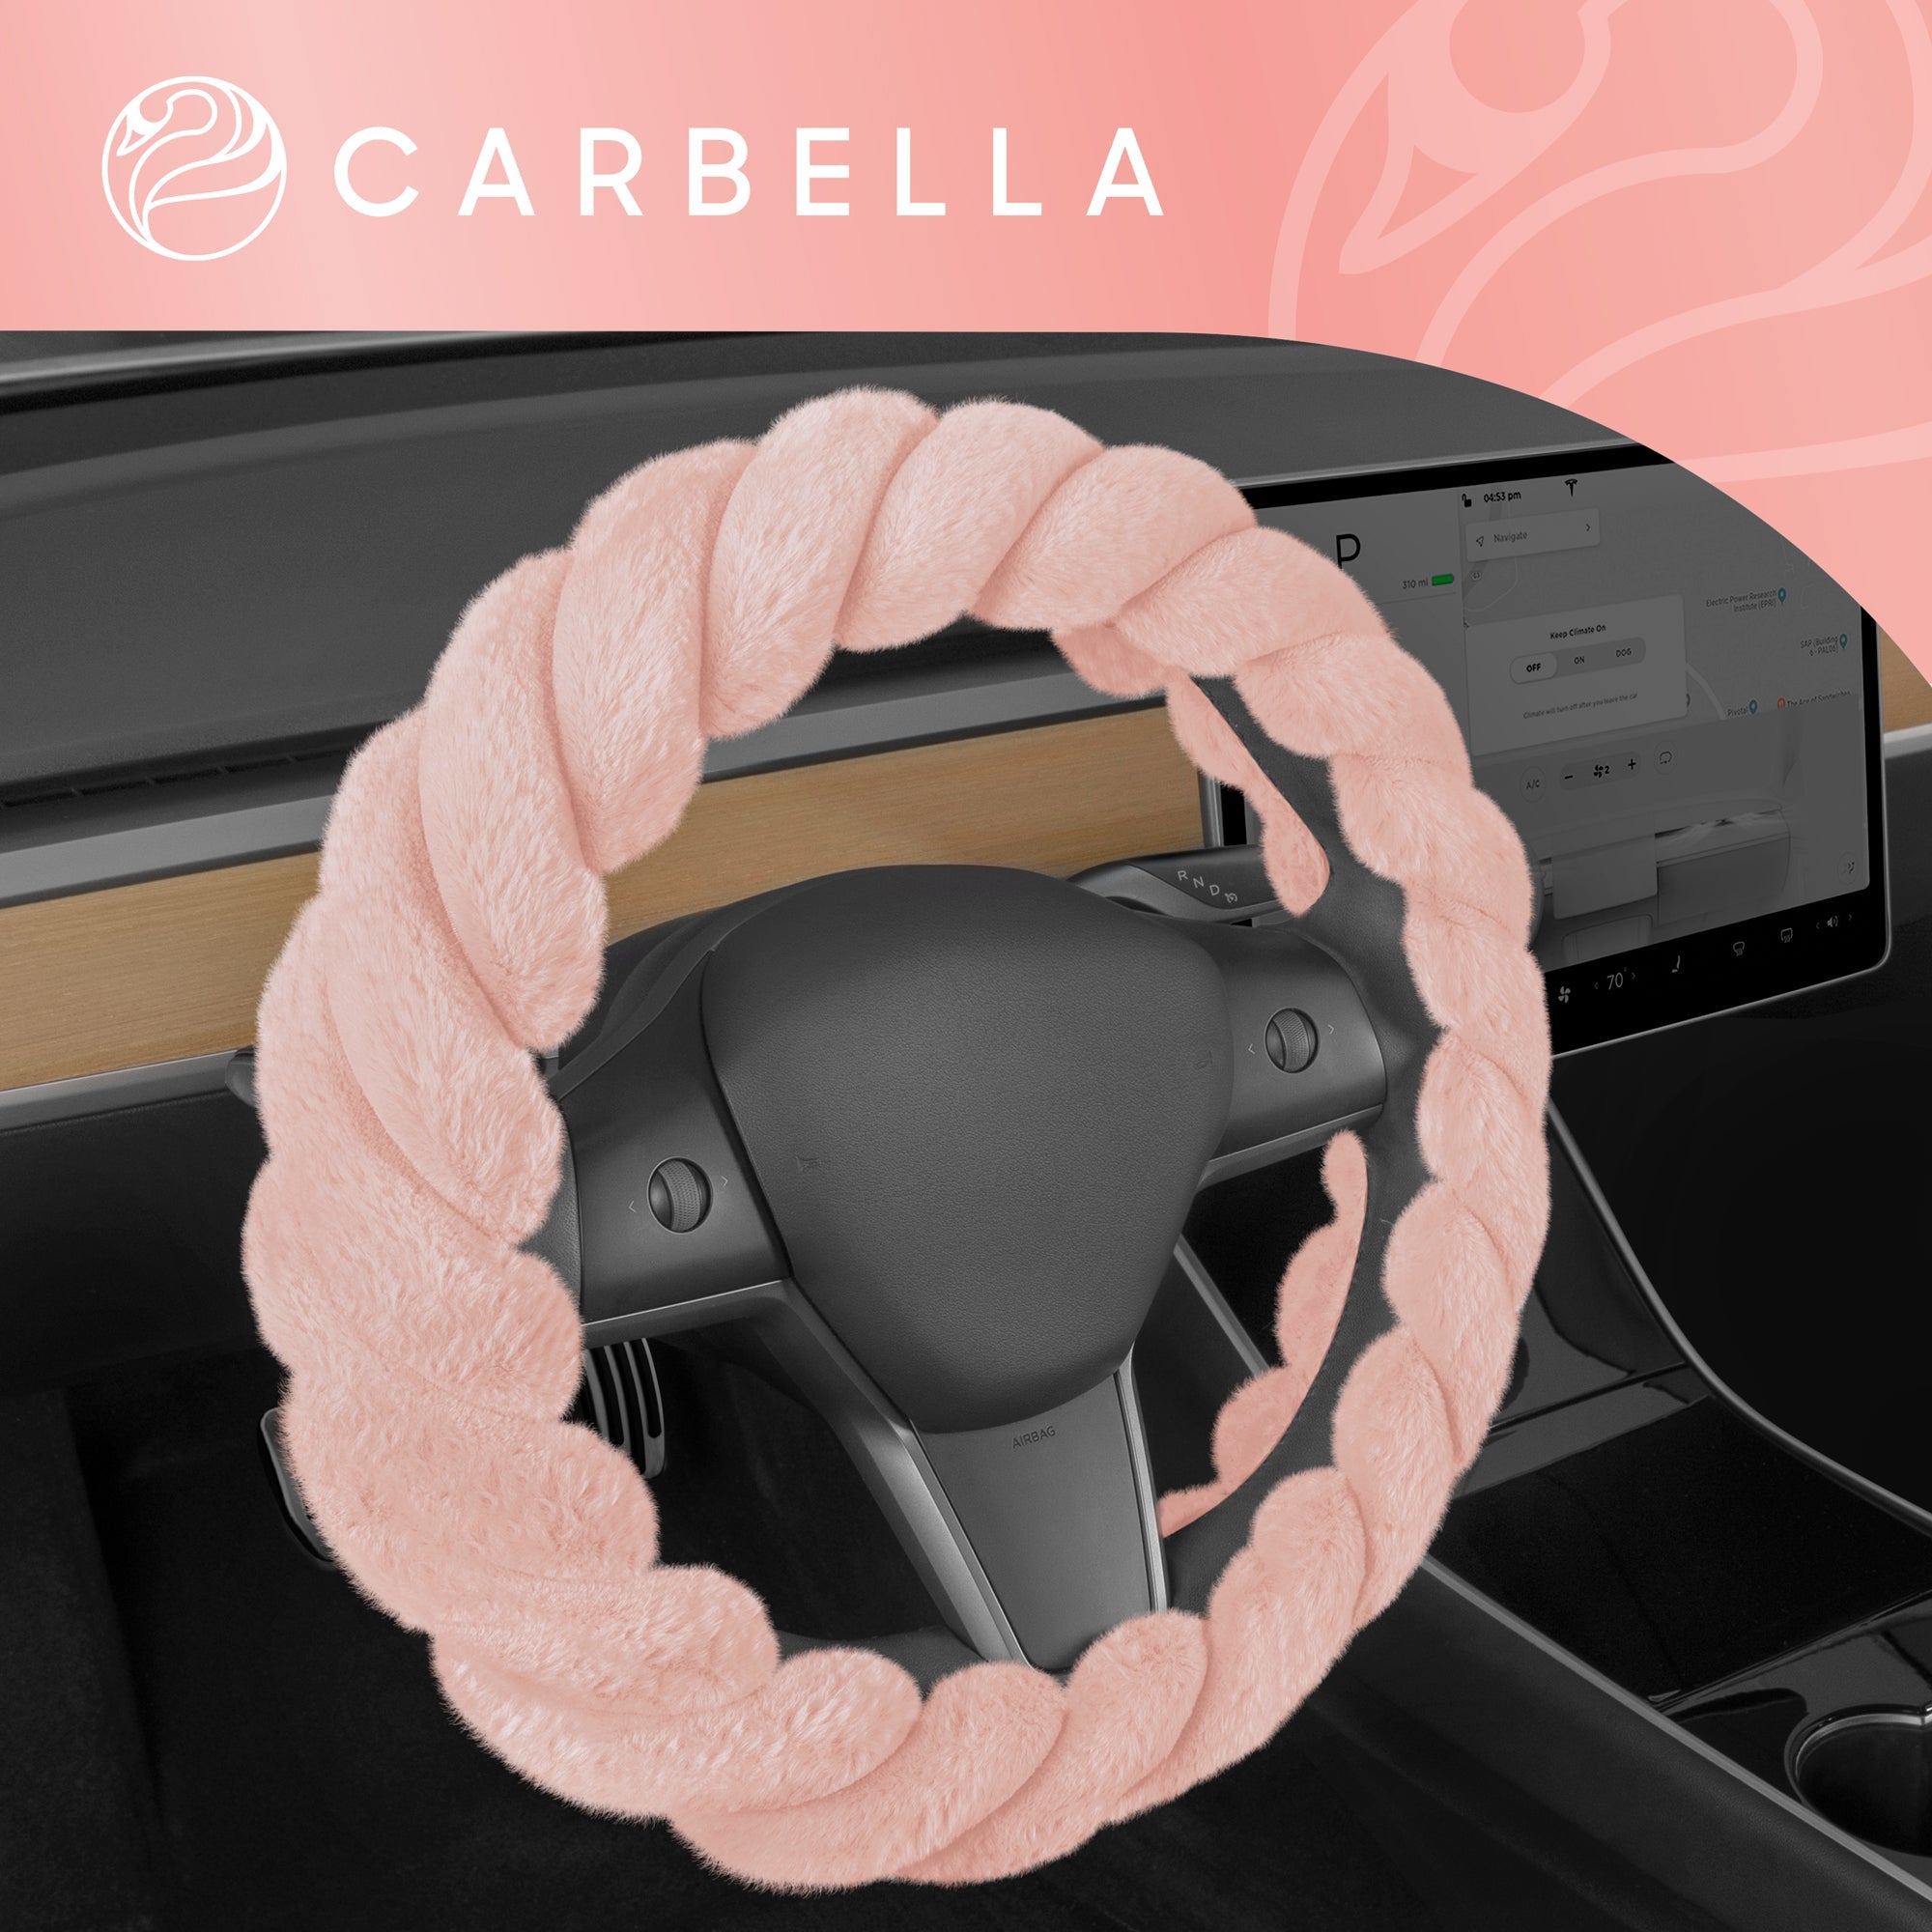 Carbella Twisted Fur Soft Pink Steering Wheel Cover, Standard 15 Inch Size Fits Most Vehicles, Fuzzy Fluffy Car Steering Cover with Soft Faux Fur Touch, Car Accessories for Women - Soft Pink:#e8c1cf